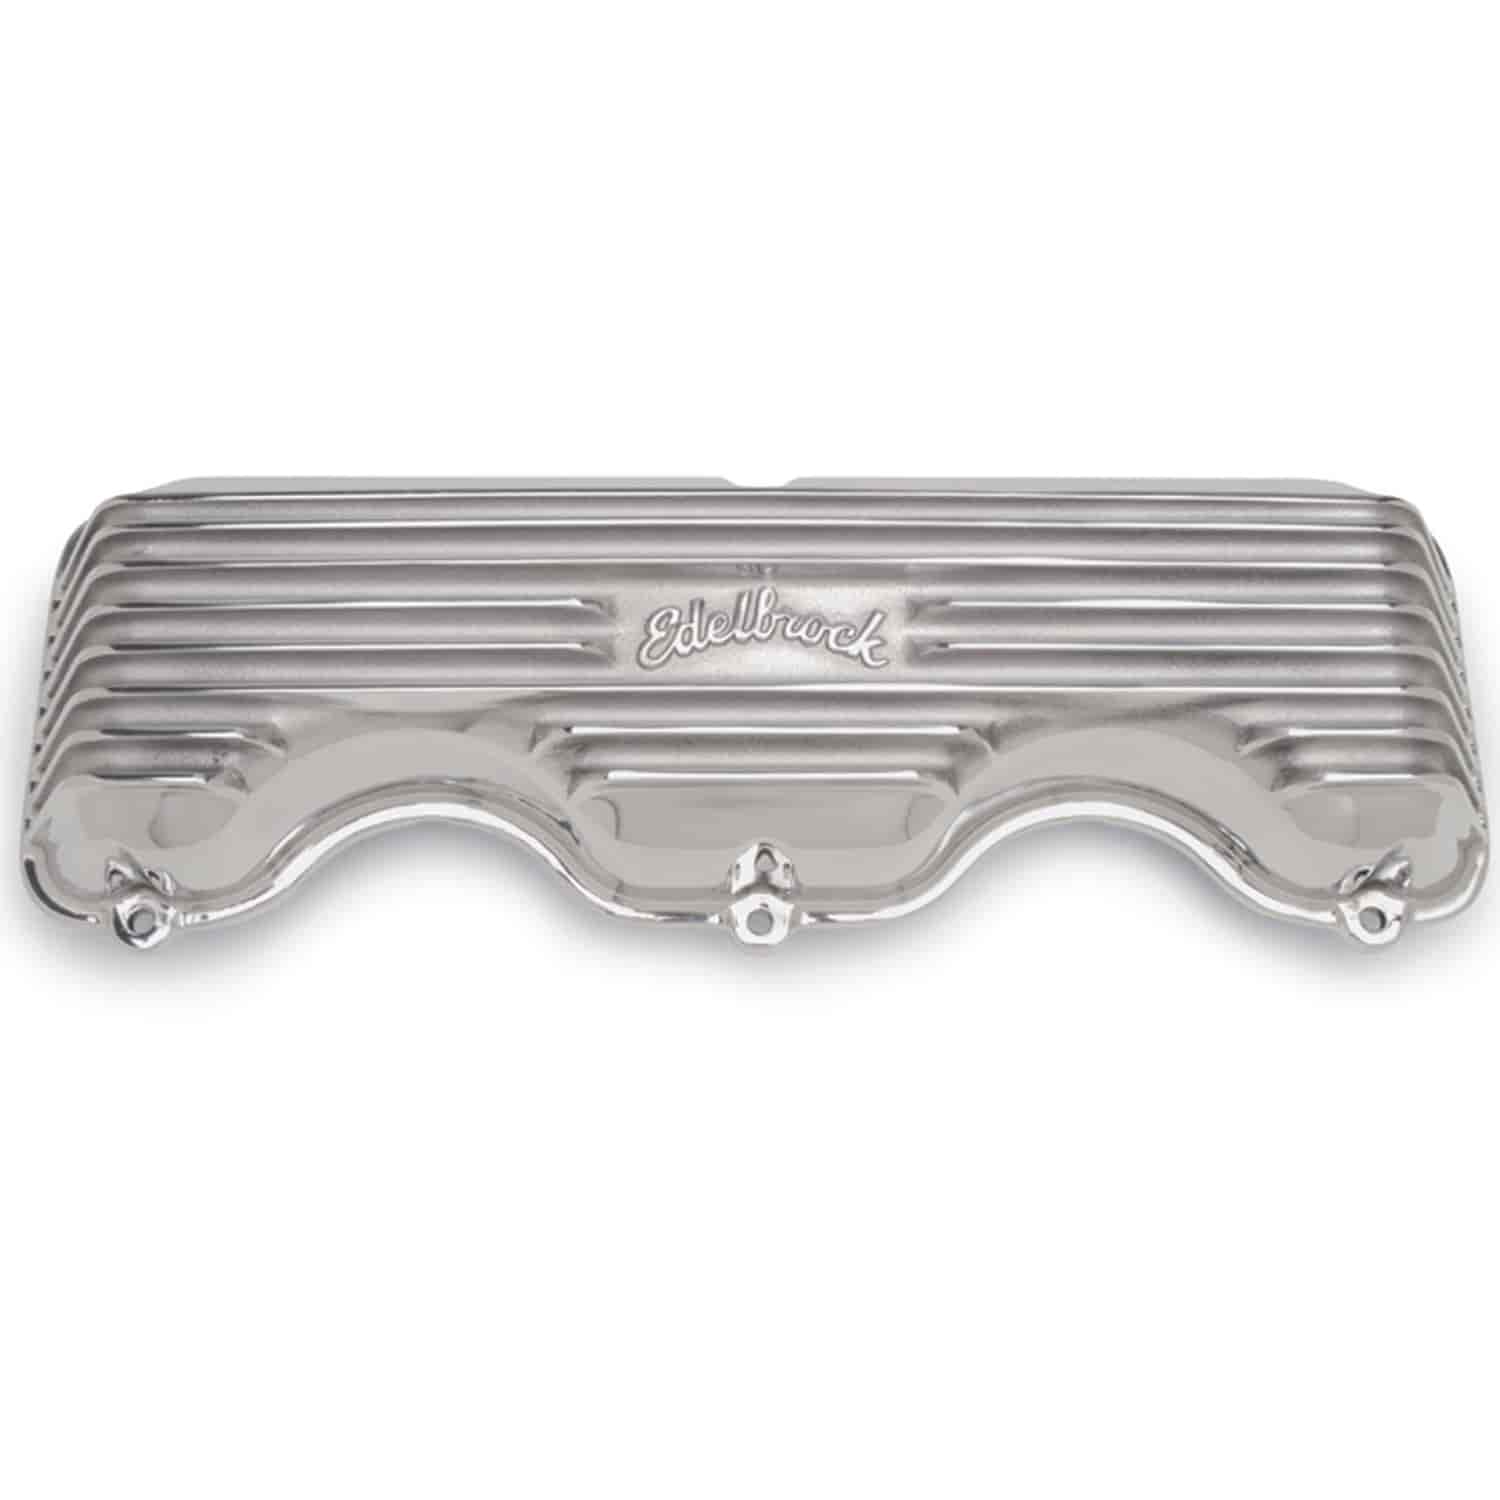 Classic Finned Valve Covers for Chevy W-Series 348/409 with Polished Finish